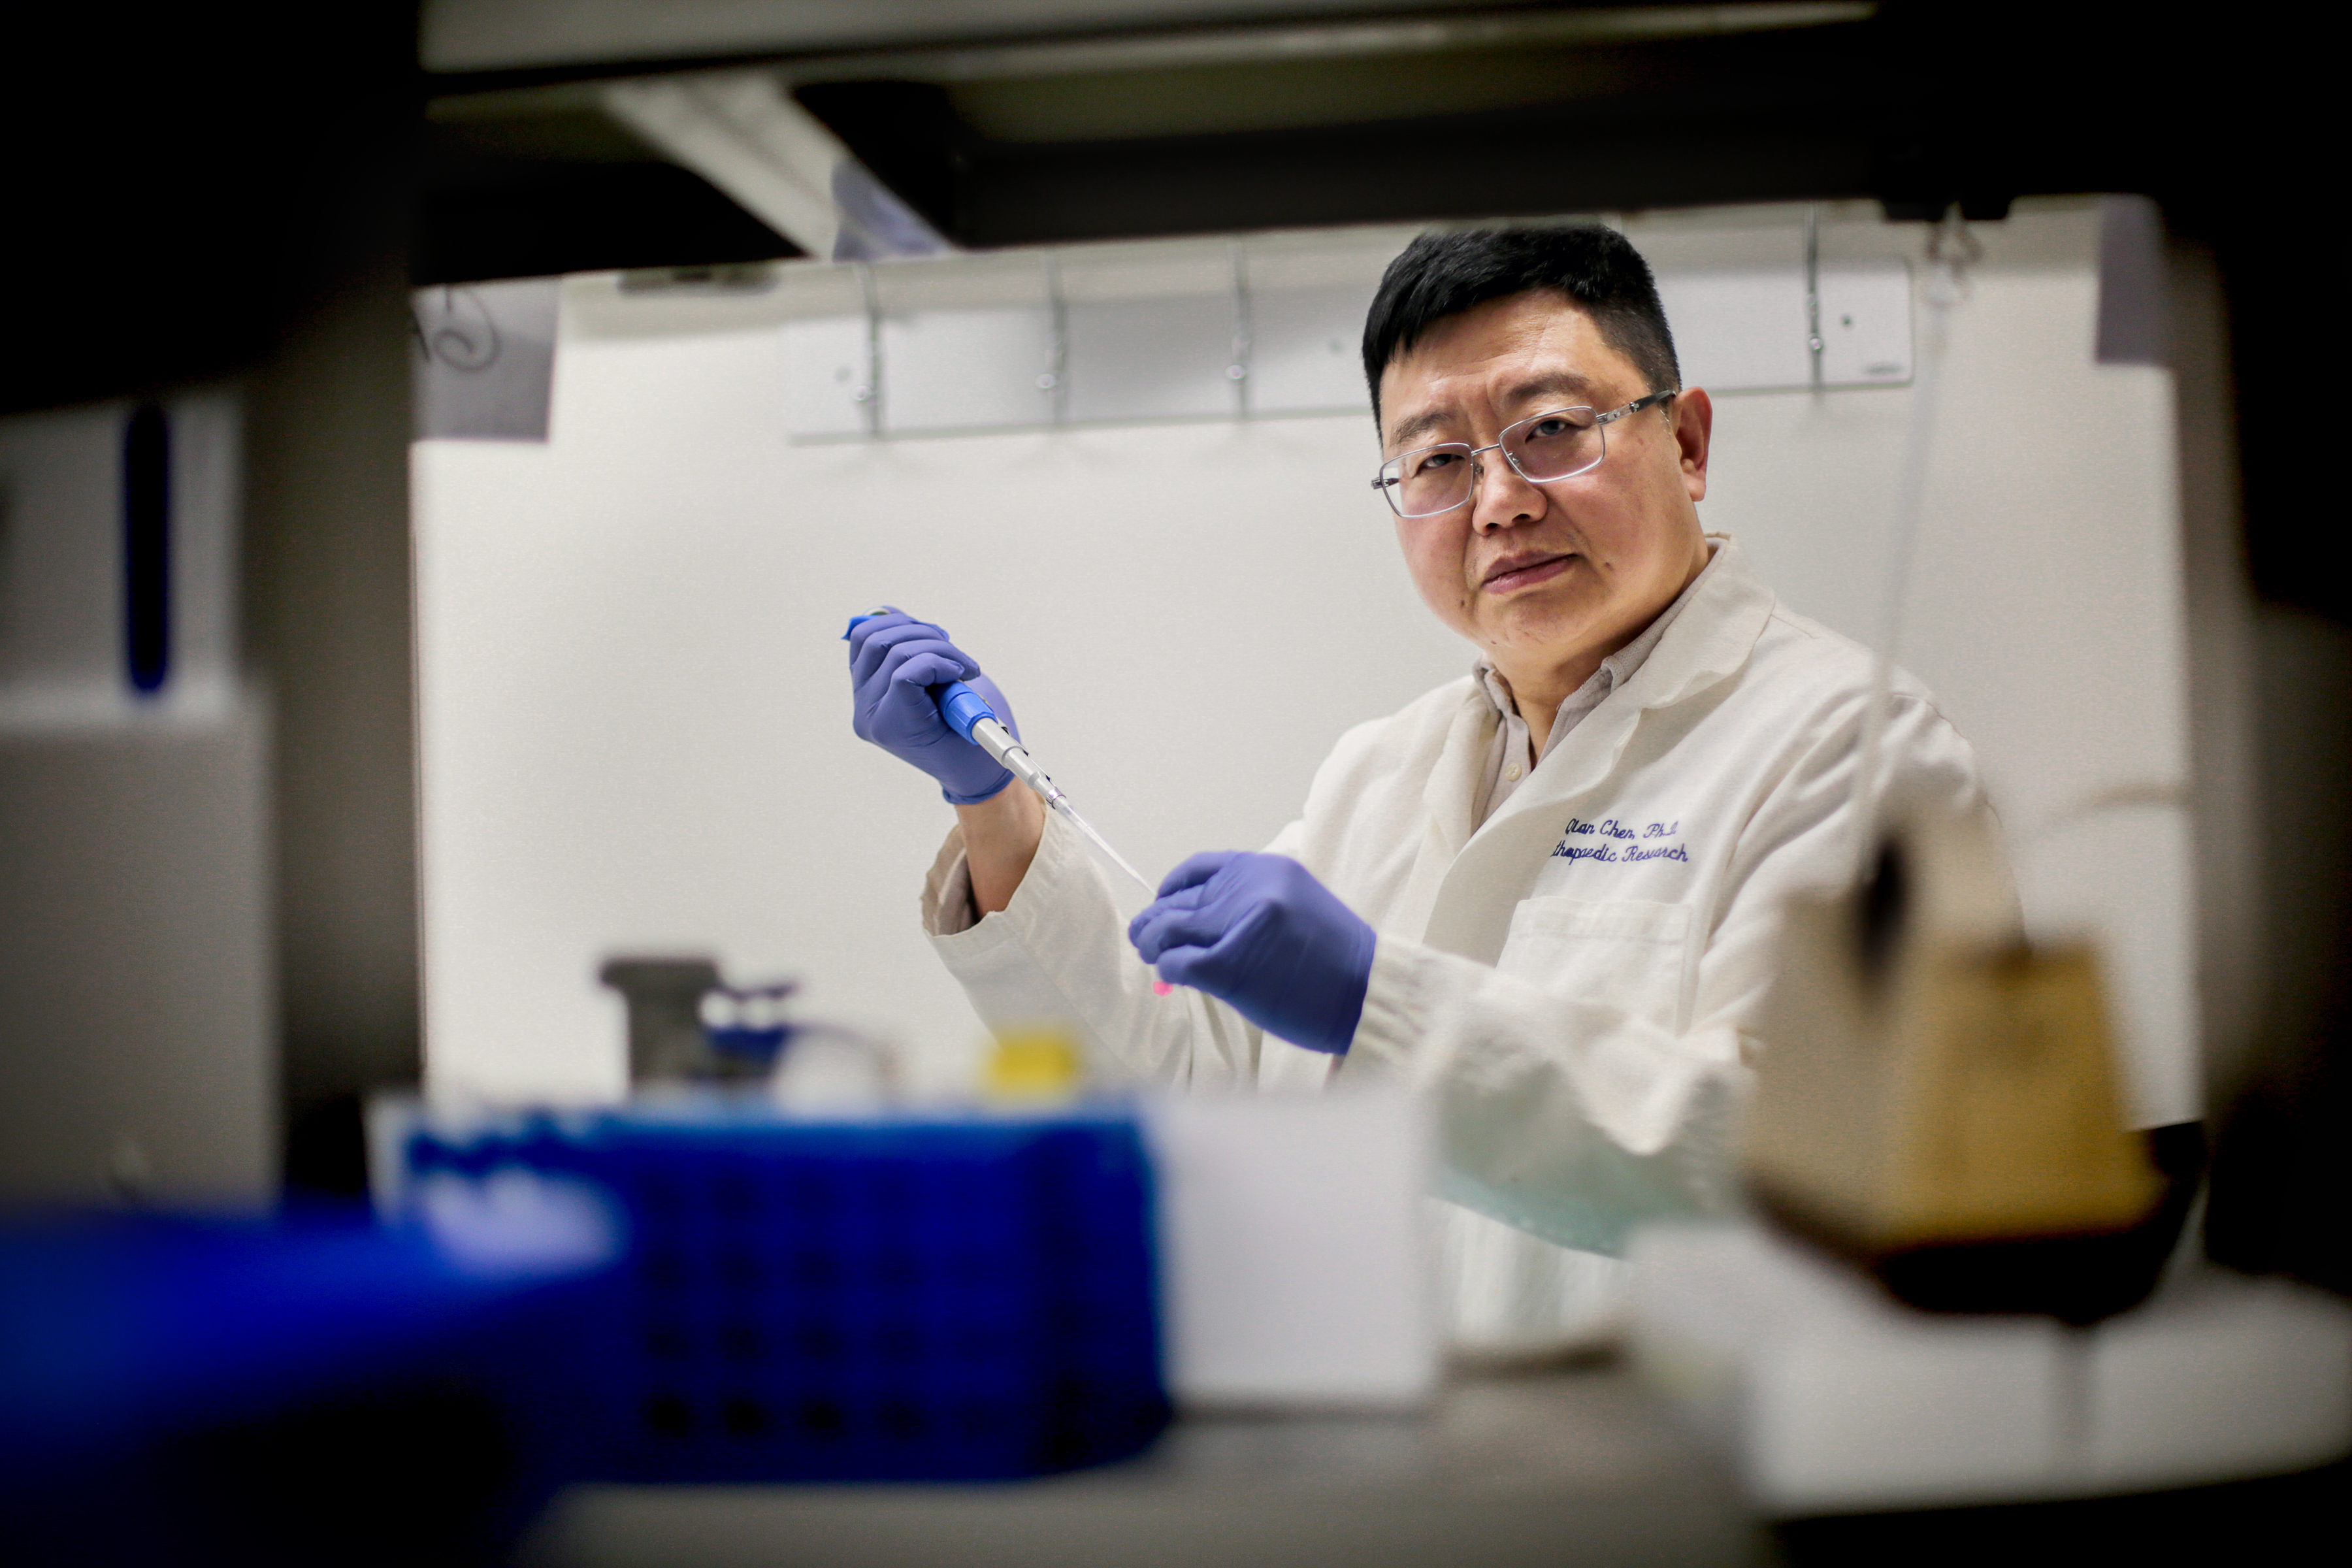 Qian Chen studies the aging of joint cartilage in order to develop therapies for the treatment of osteoarthritis and identify biomarkers that will aid the diagnosis of arthritis at early stages.